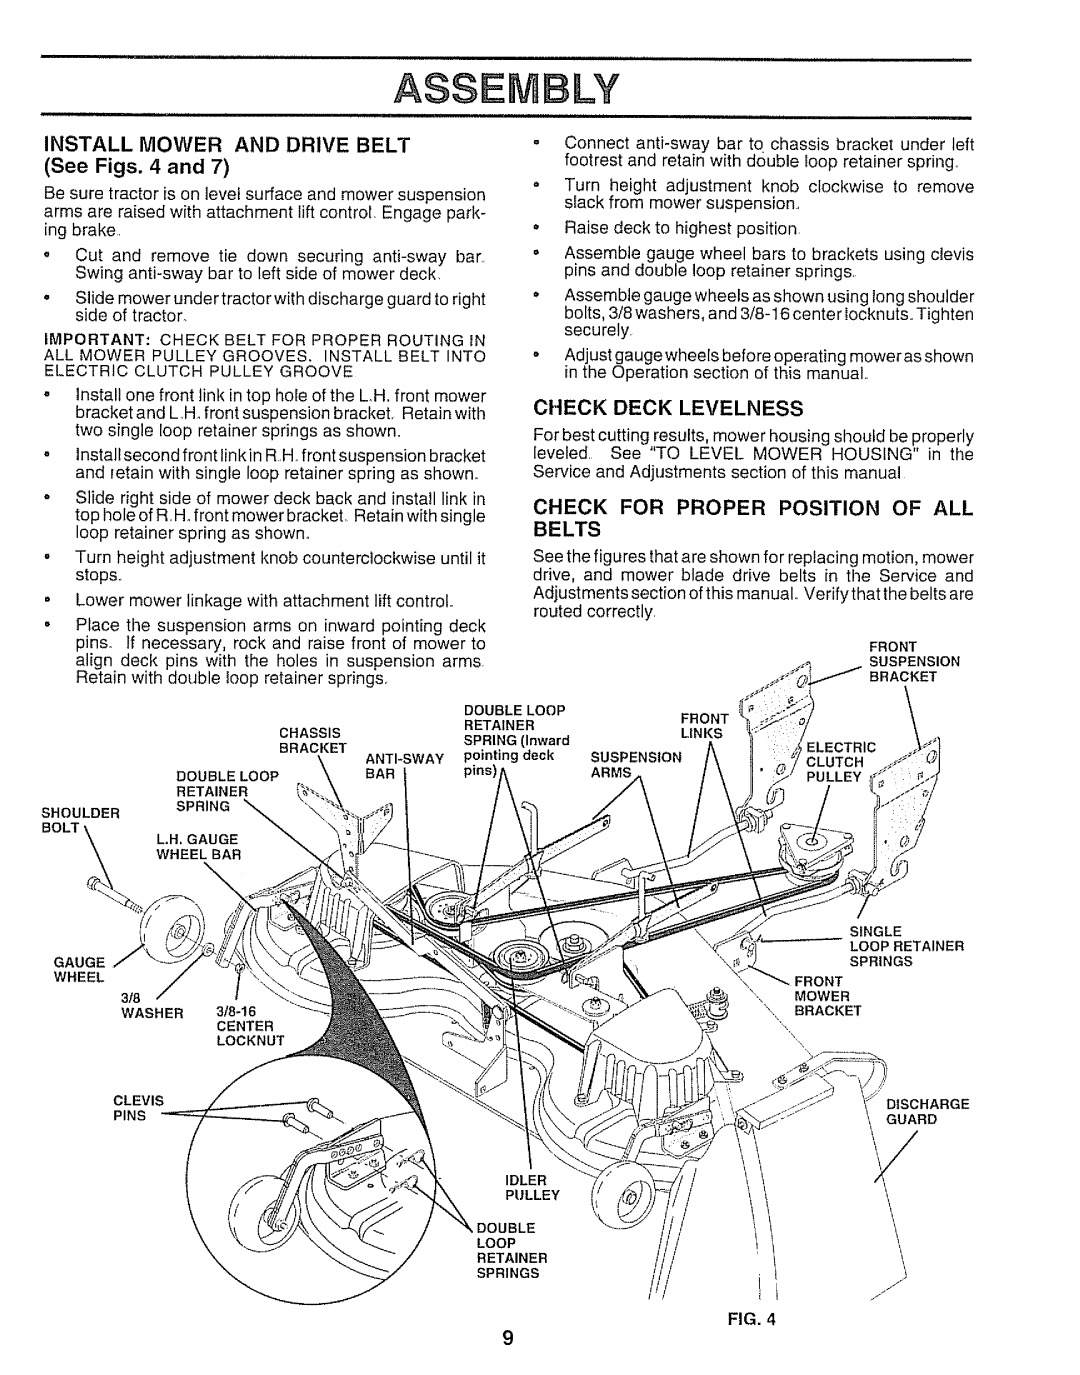 Sears 917.250551 manual Assembly, See Figs. 4 and, Check Deck Levelness, Check For Proper Position Of All Belts 